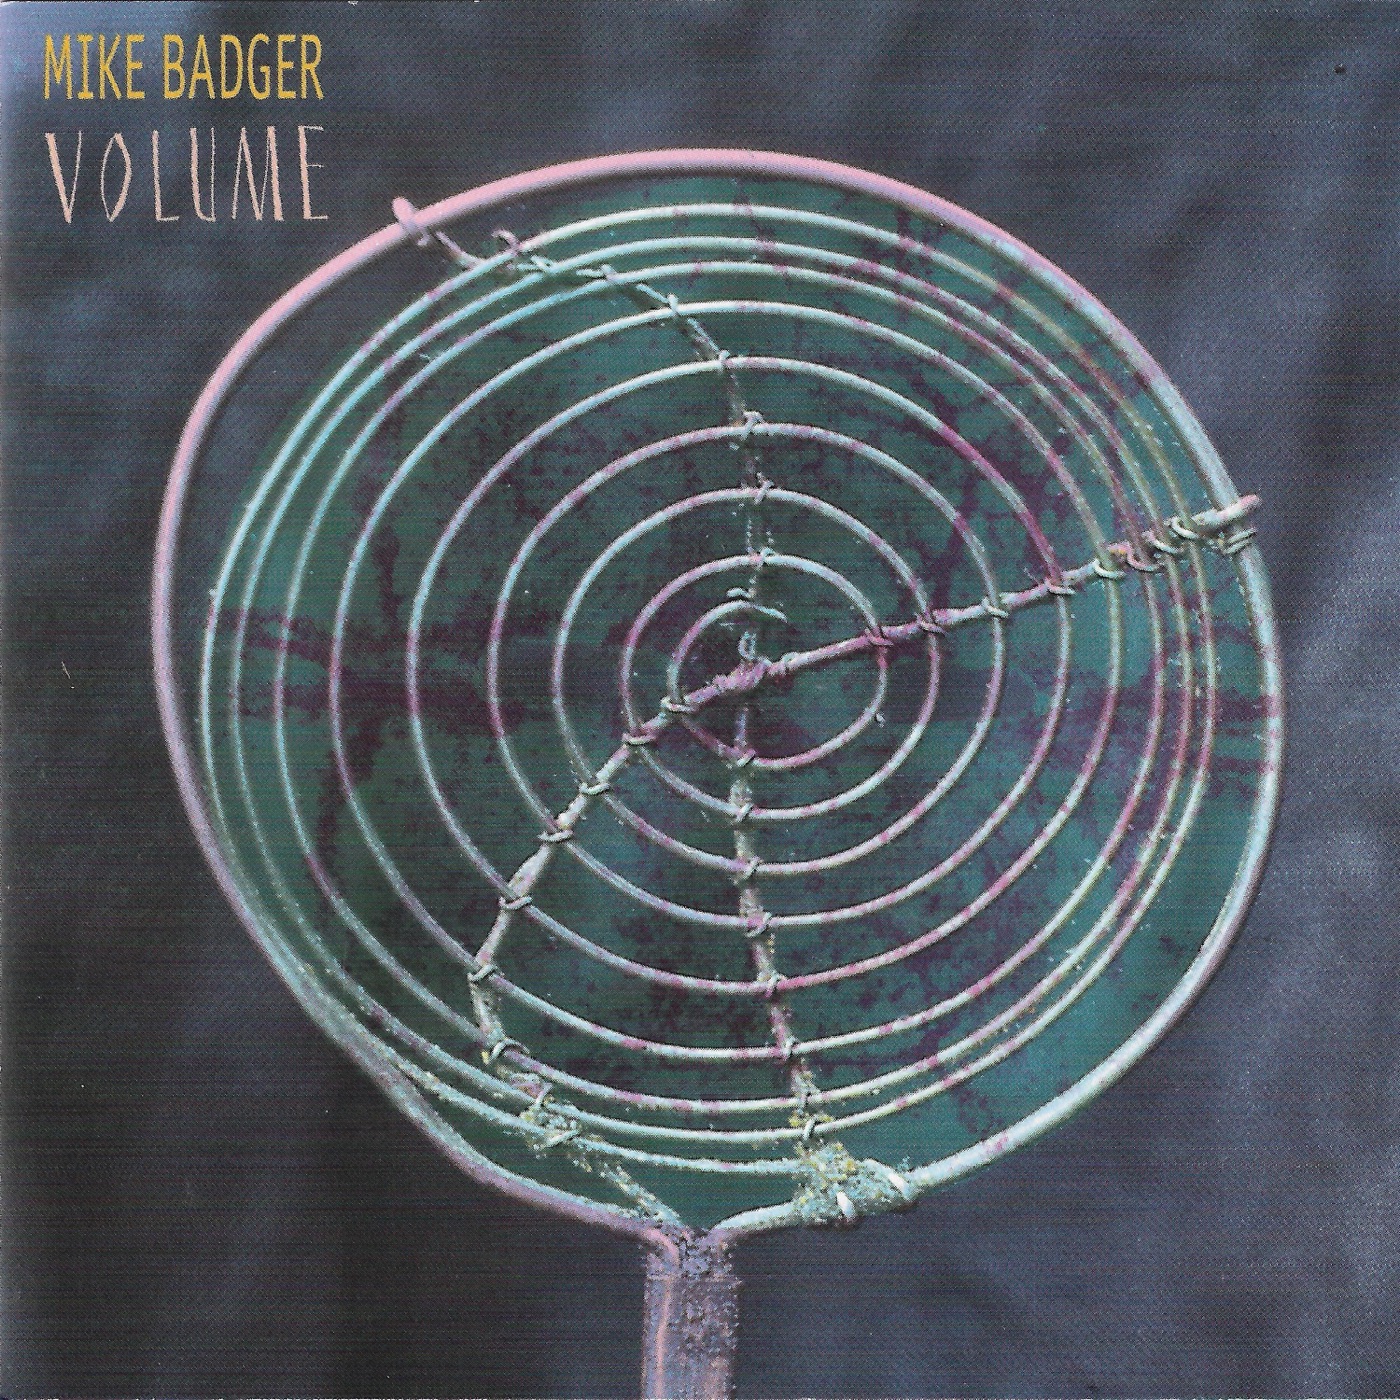 Volume by Mike Badger